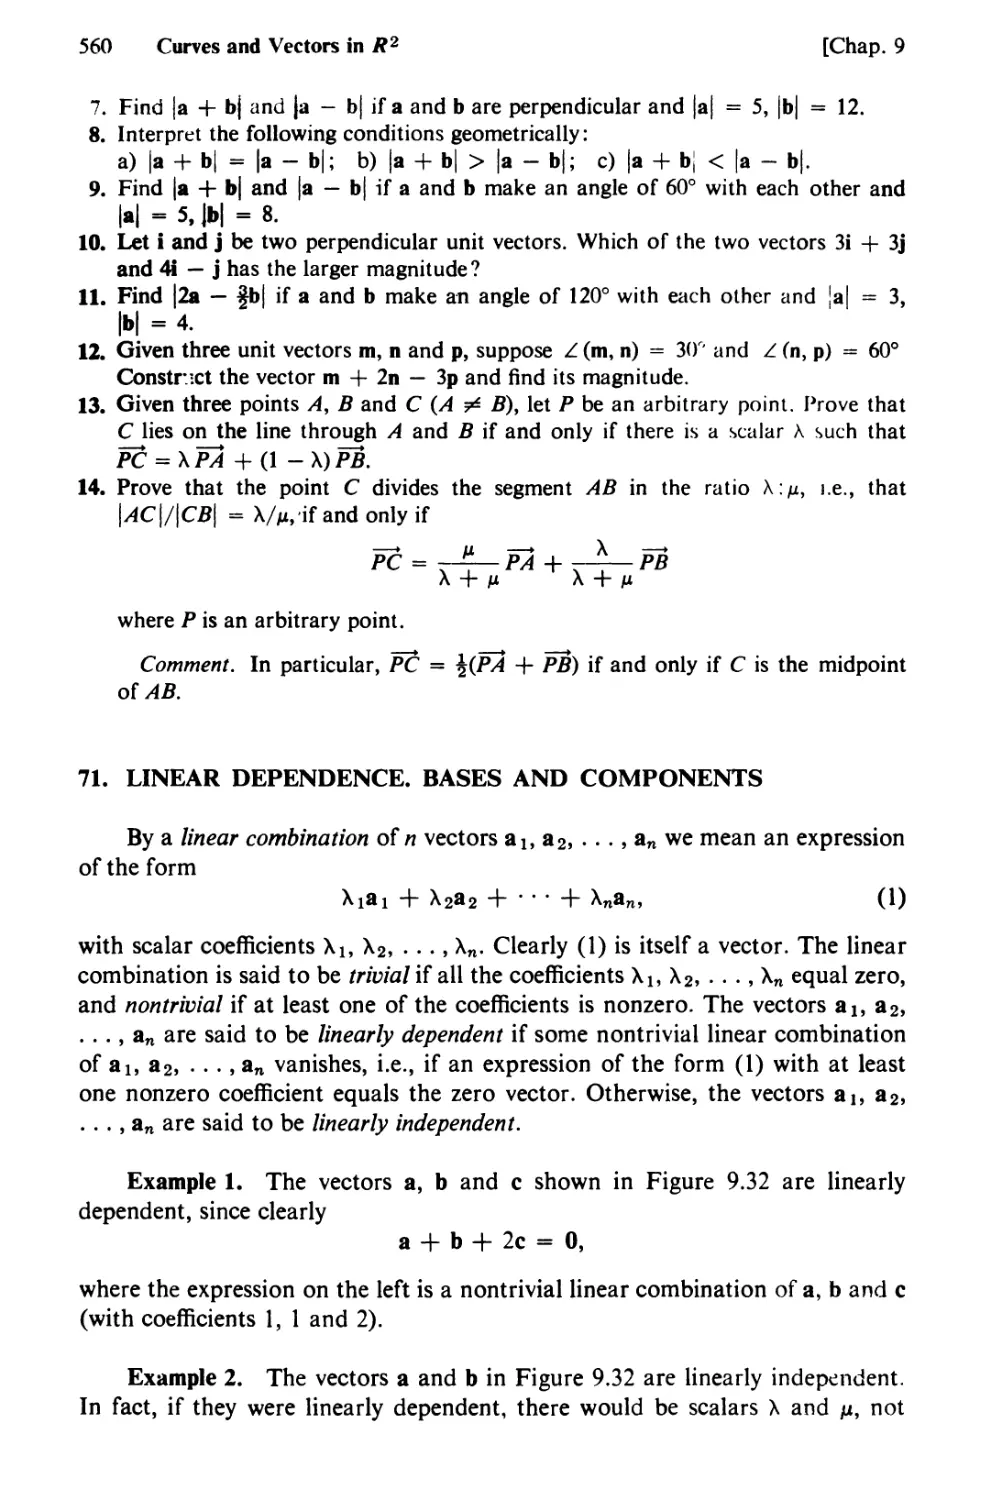 71. Linear Dependence. Bases and Components